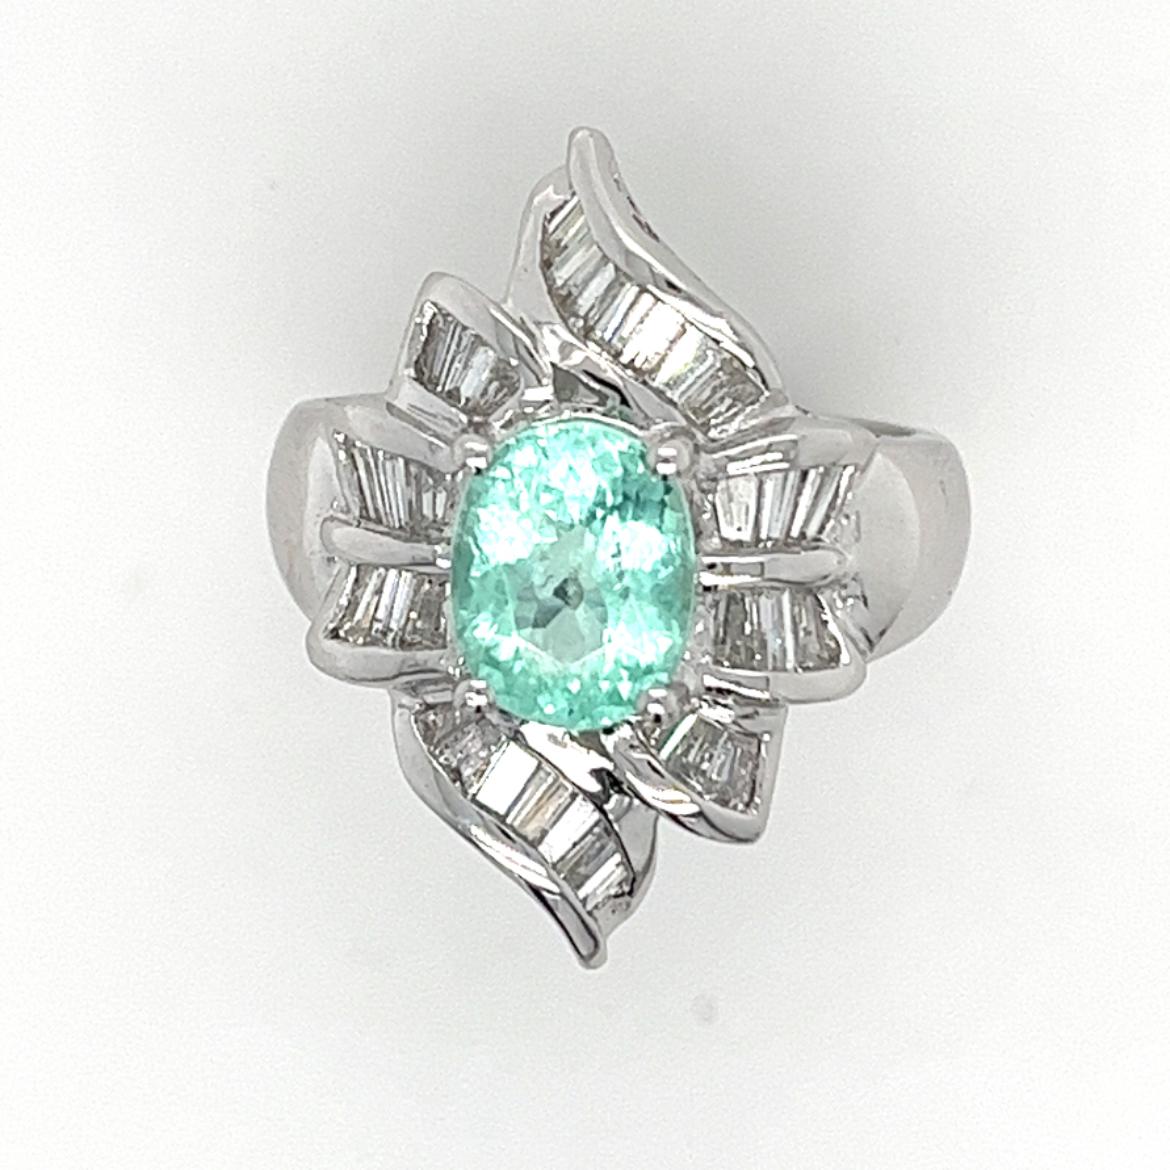 Platinum 900 Paraiba Tourmaline Ring with Diamonds

1 Paraiba - 1.720CT
32 Diamonds - 1.200CT
Platinum 900 - 10.490GM

This captivating ring showcases an exquisite Paraiba tourmaline, a gemstone renowned for its mesmerizing and vibrant blue-green